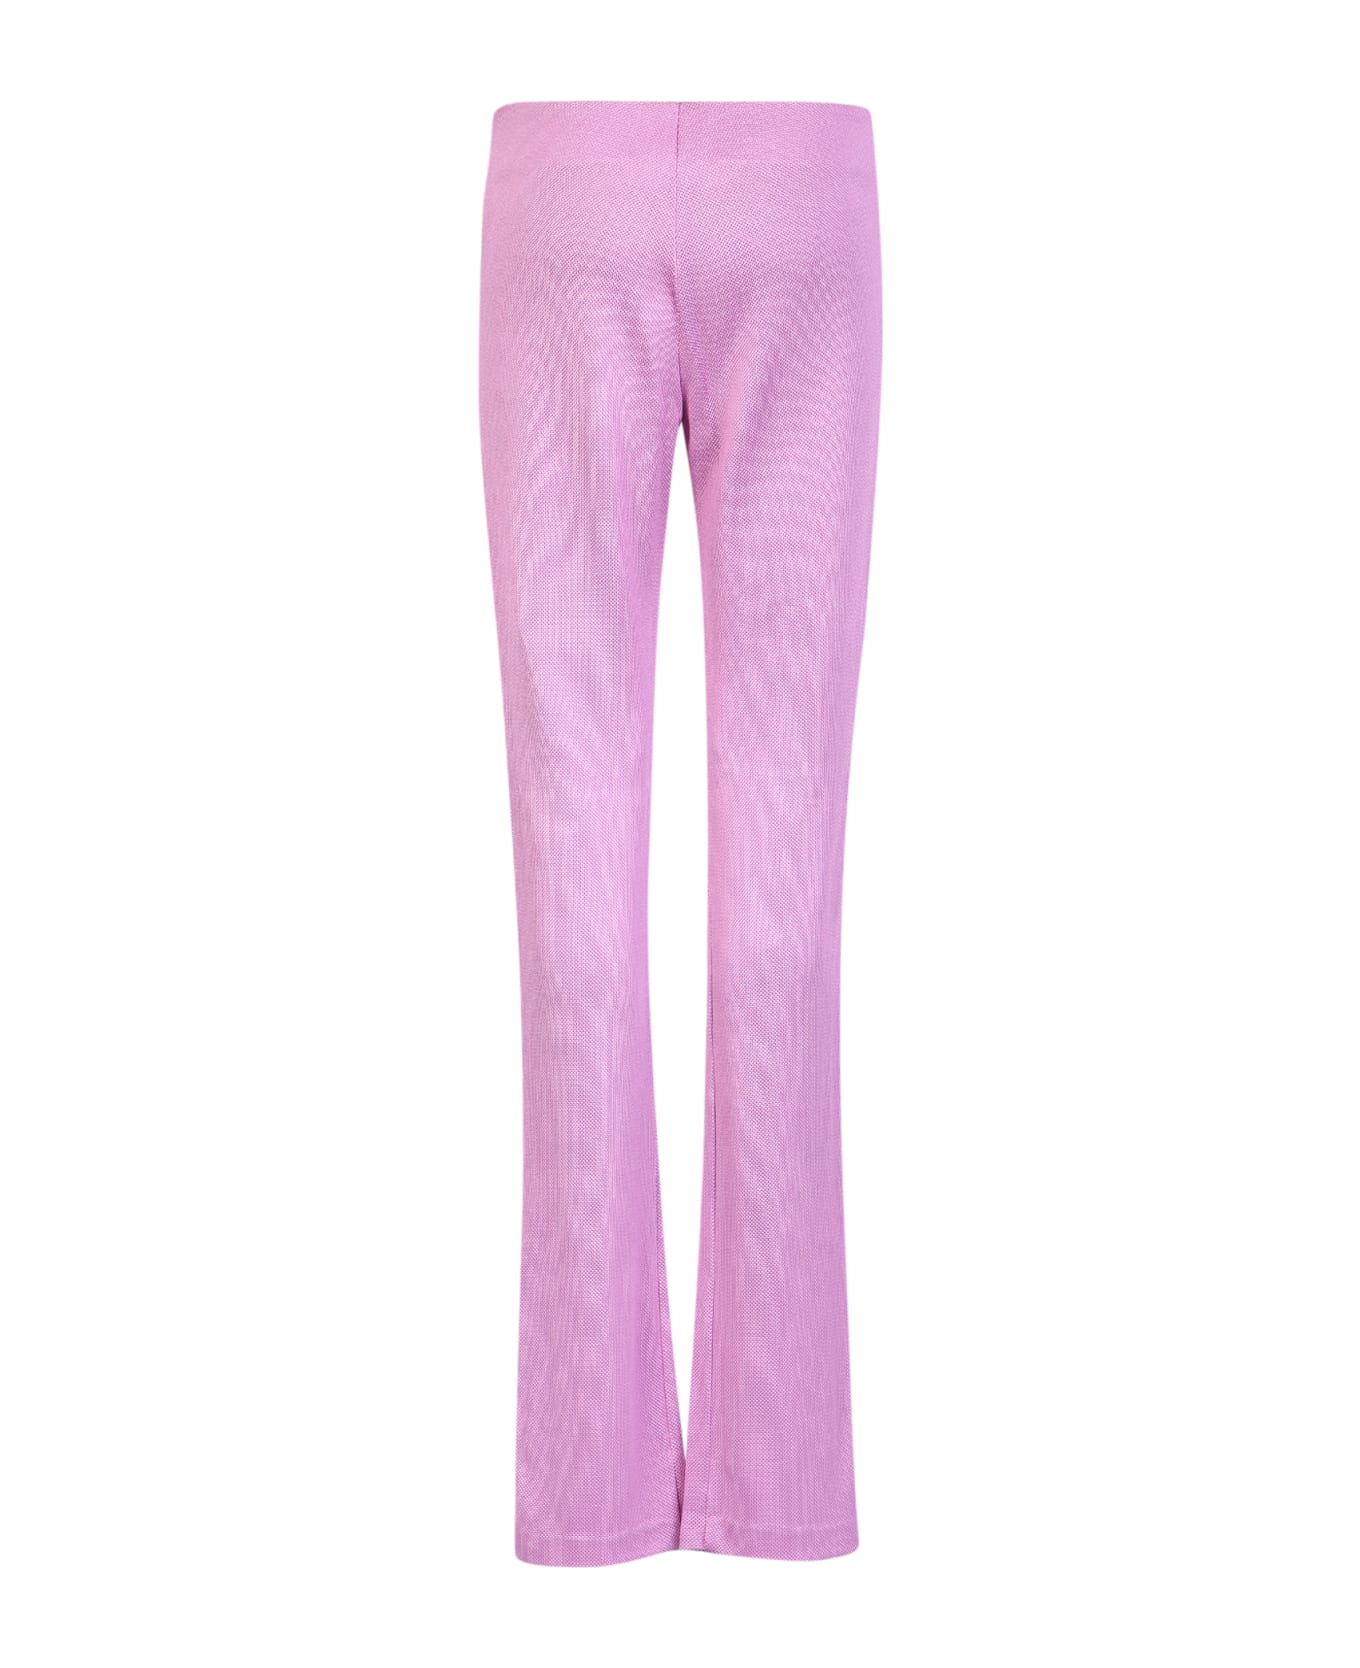 1017 ALYX 9SM Mauve Knitted Leggings - Pink